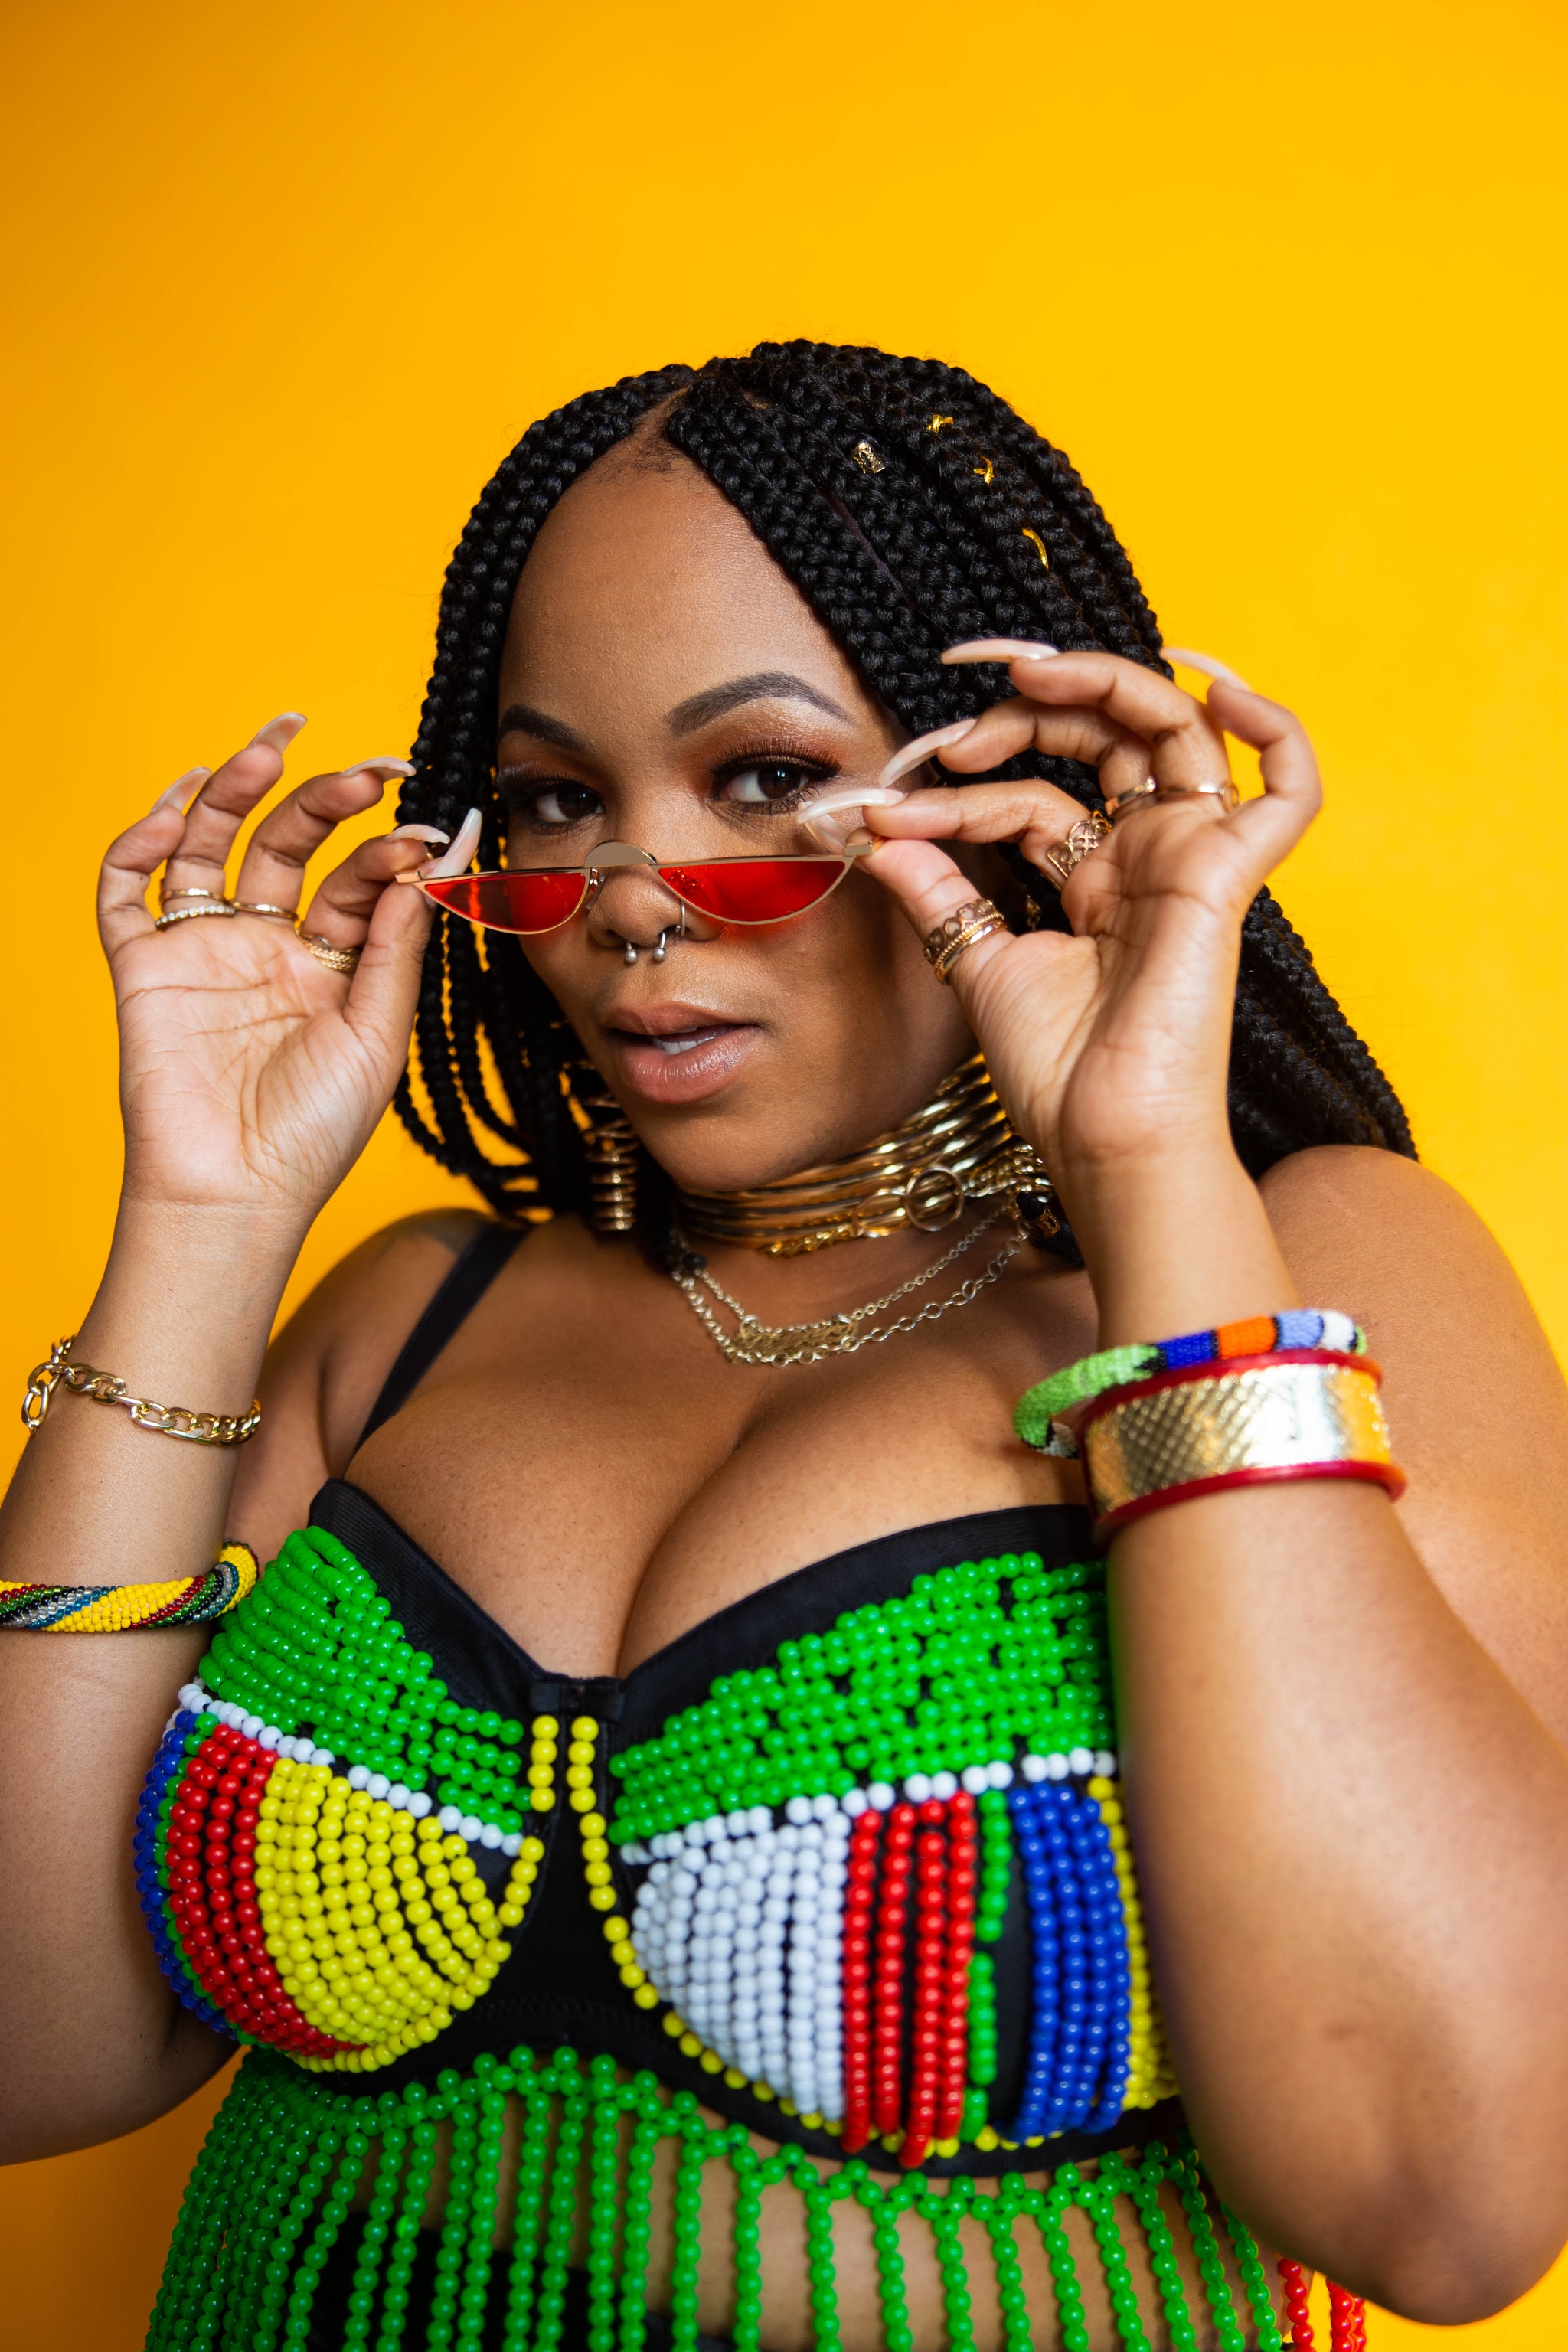 A Black woman looks out at us over a pair of red-tinted sunglasses that she pulls down with both hands. She wears colorful bracelets on both wrists and a low-cut top with green, yellow, red, and white beading.